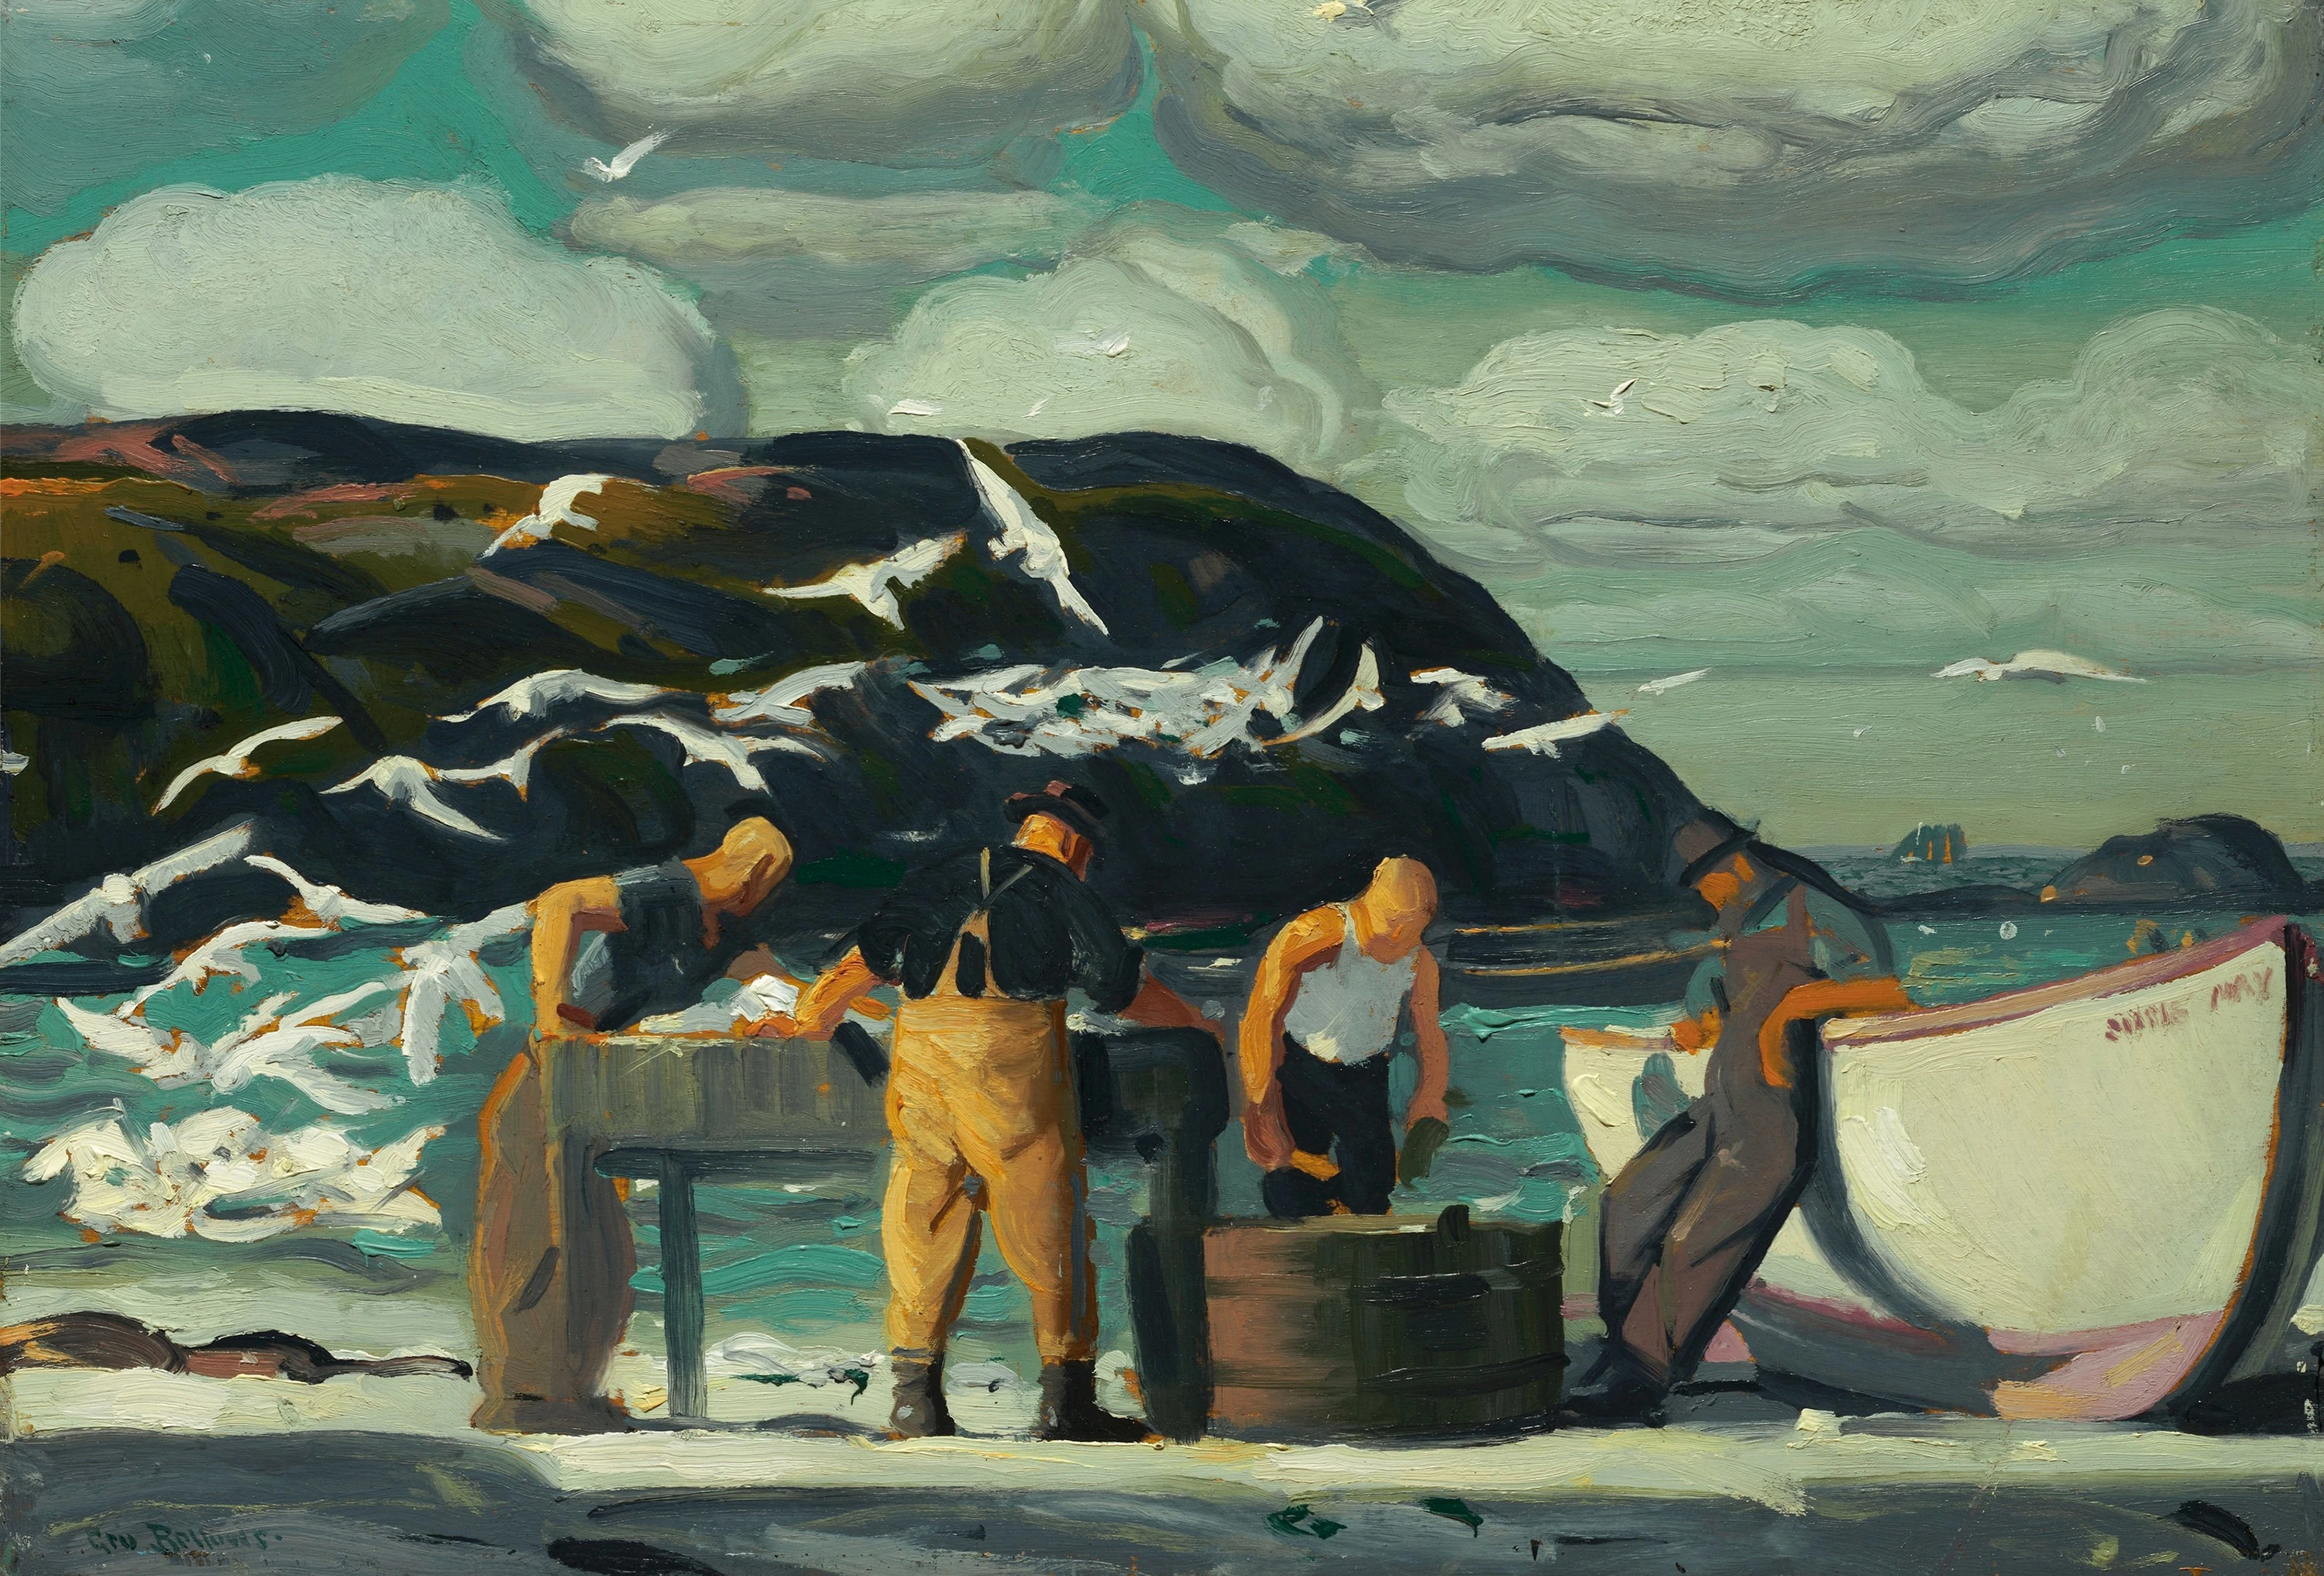 Cleaning Fish, George Bellows